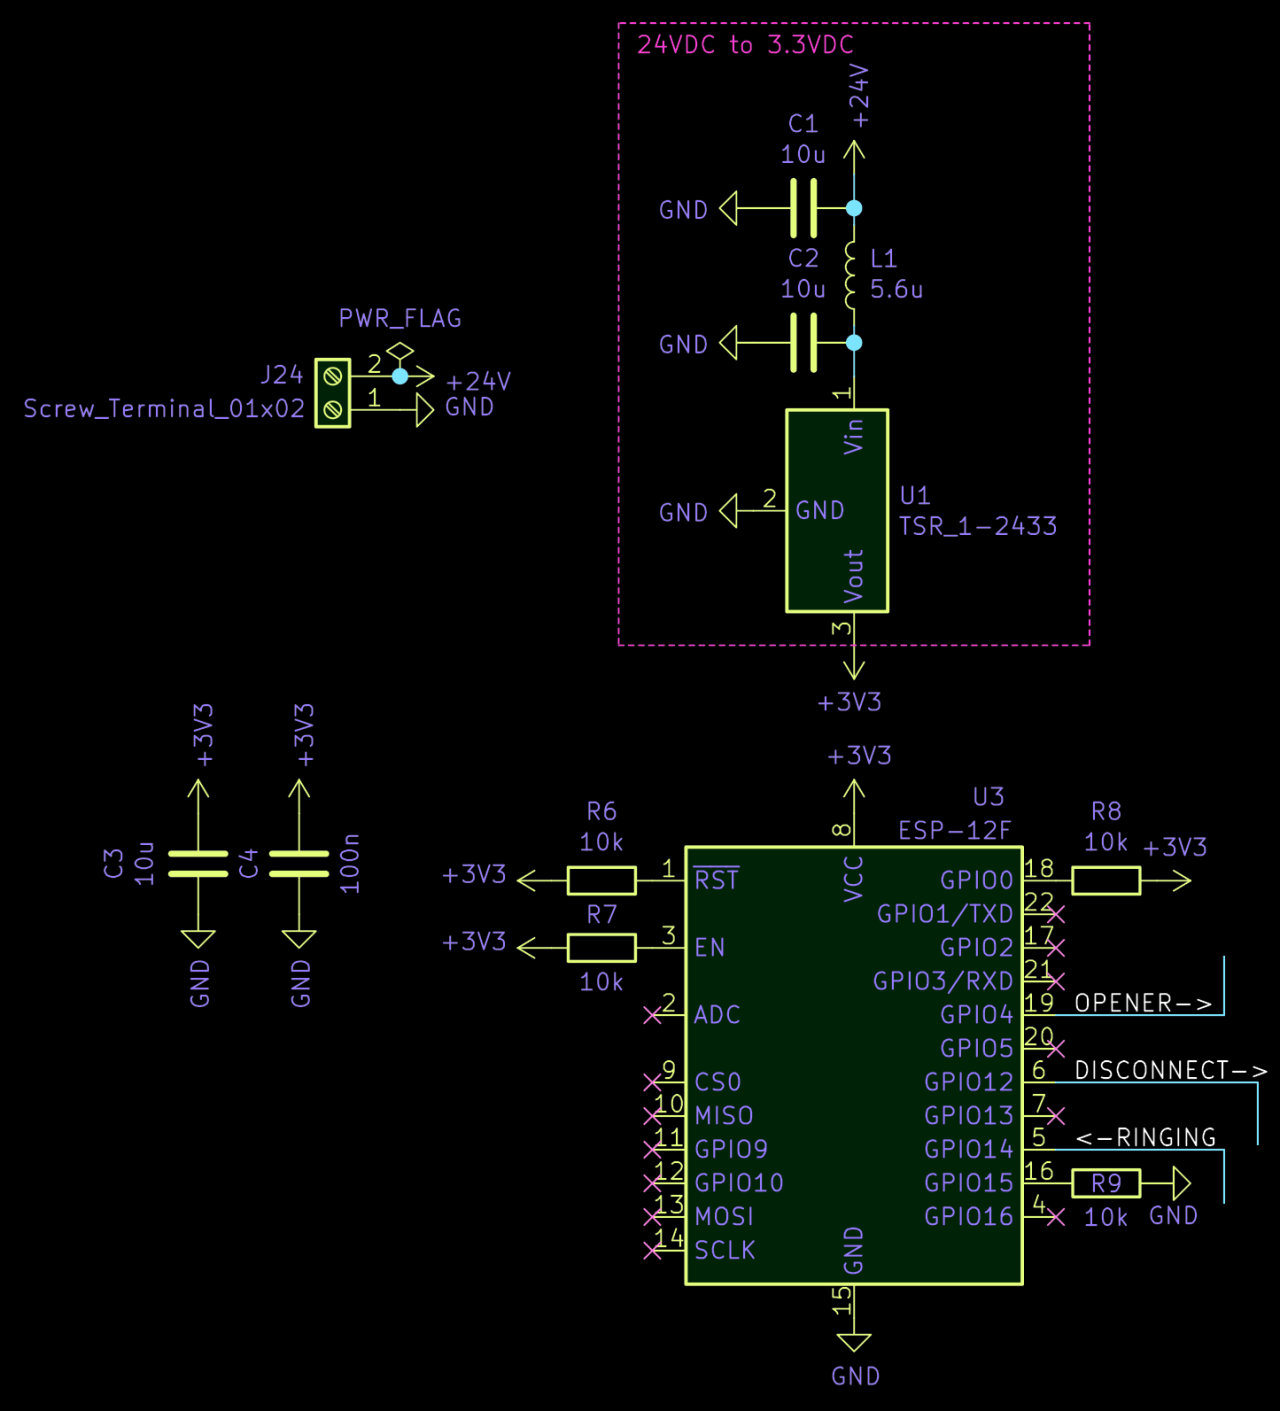 Excerpt of the circuit diagram showing only the ESP and anything related to the voltage converter.